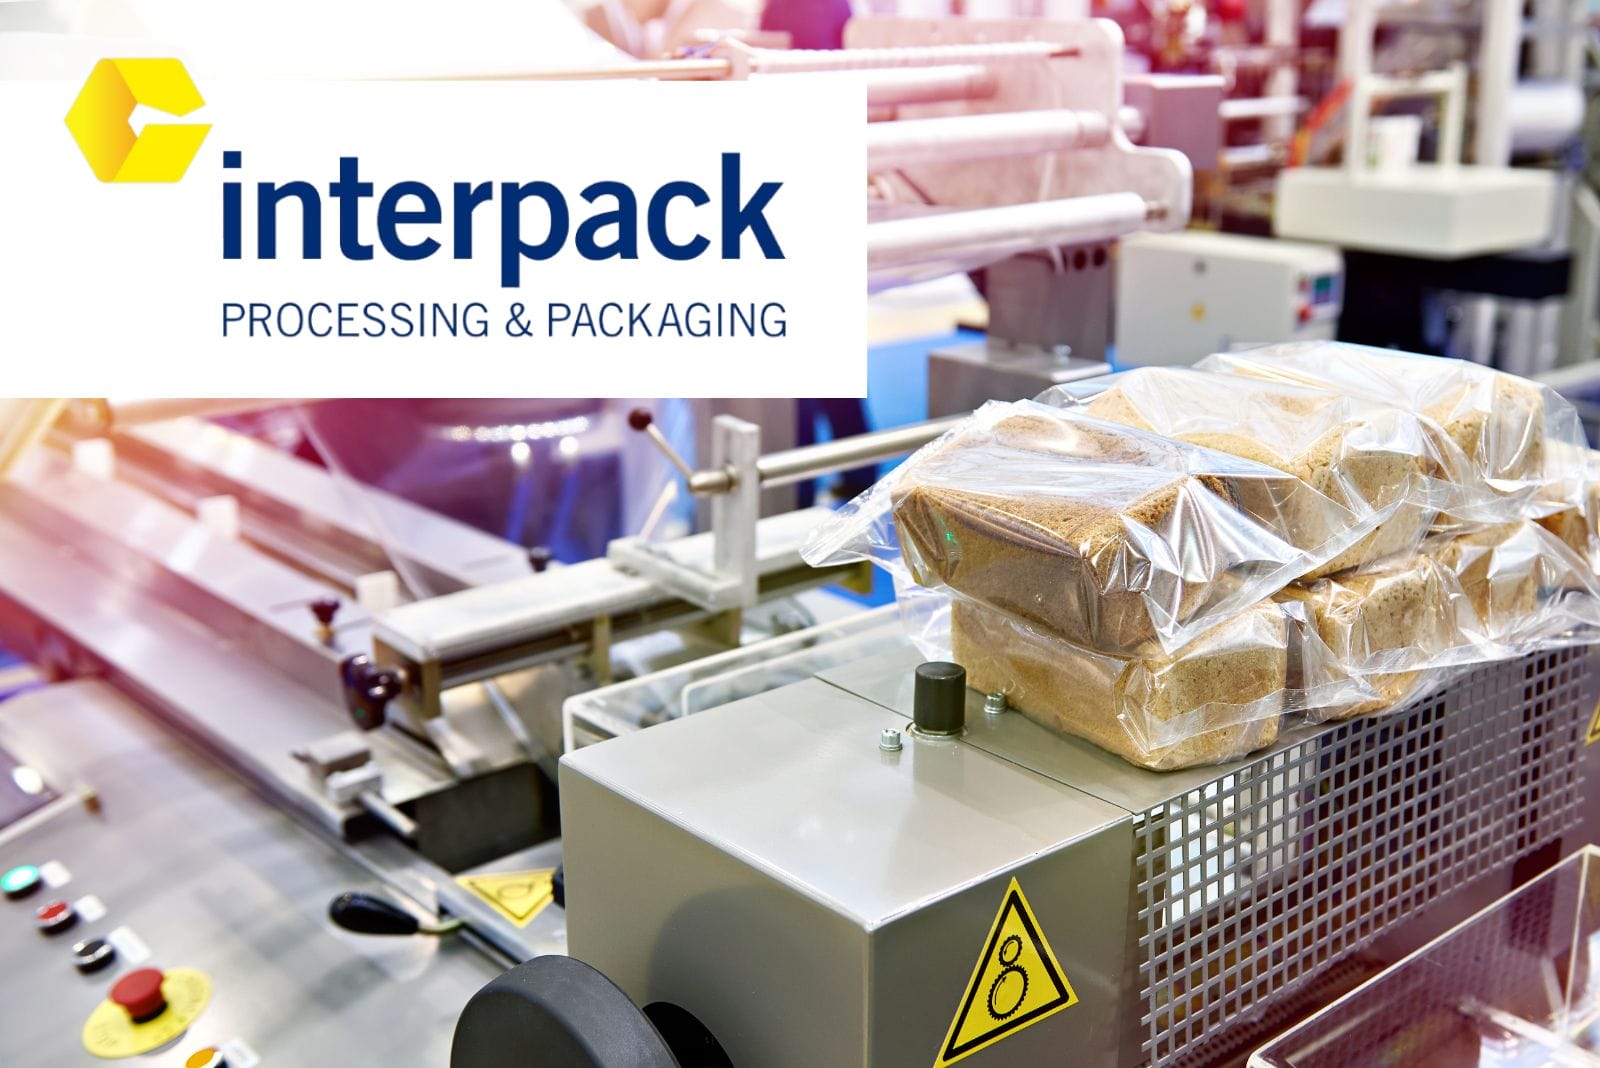 bread loaves in plastic packaging with interpack logo